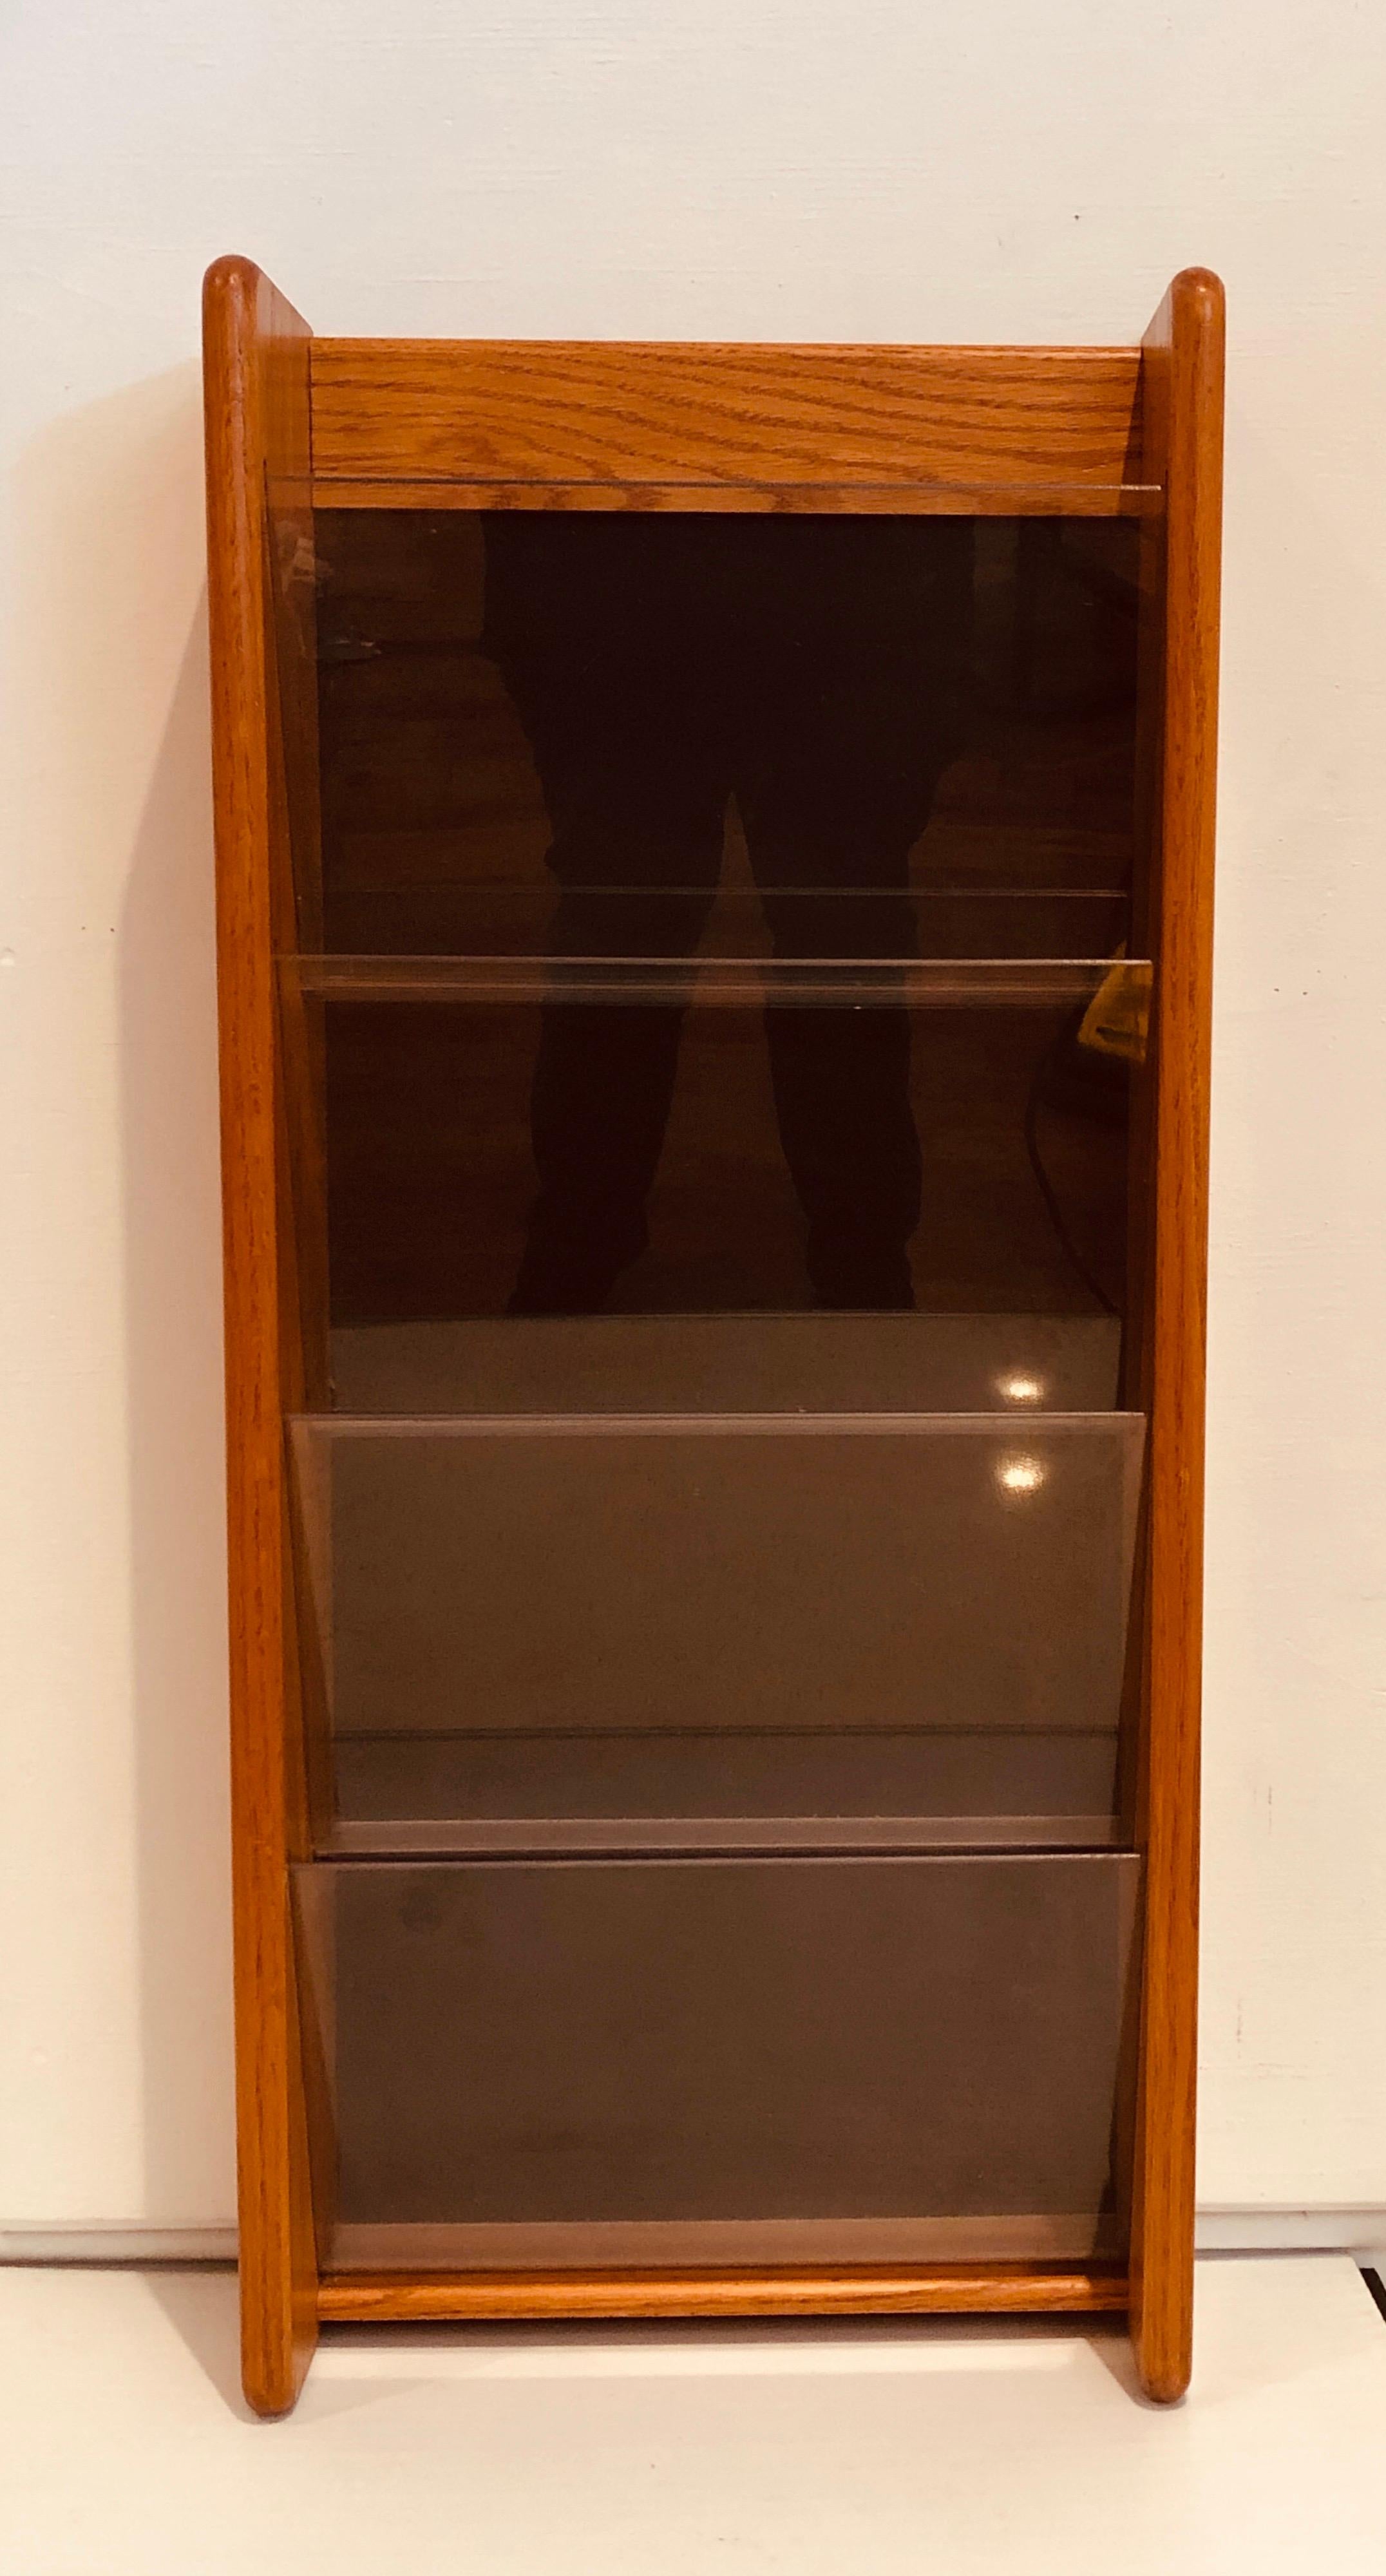 Versatile wall-mounted magazine Holder, with 4 pockets of acrylic solid teak walls easy to hang nice condition circa 1980's we have 2 available , the buyer has the choice to buy 1 or 2.